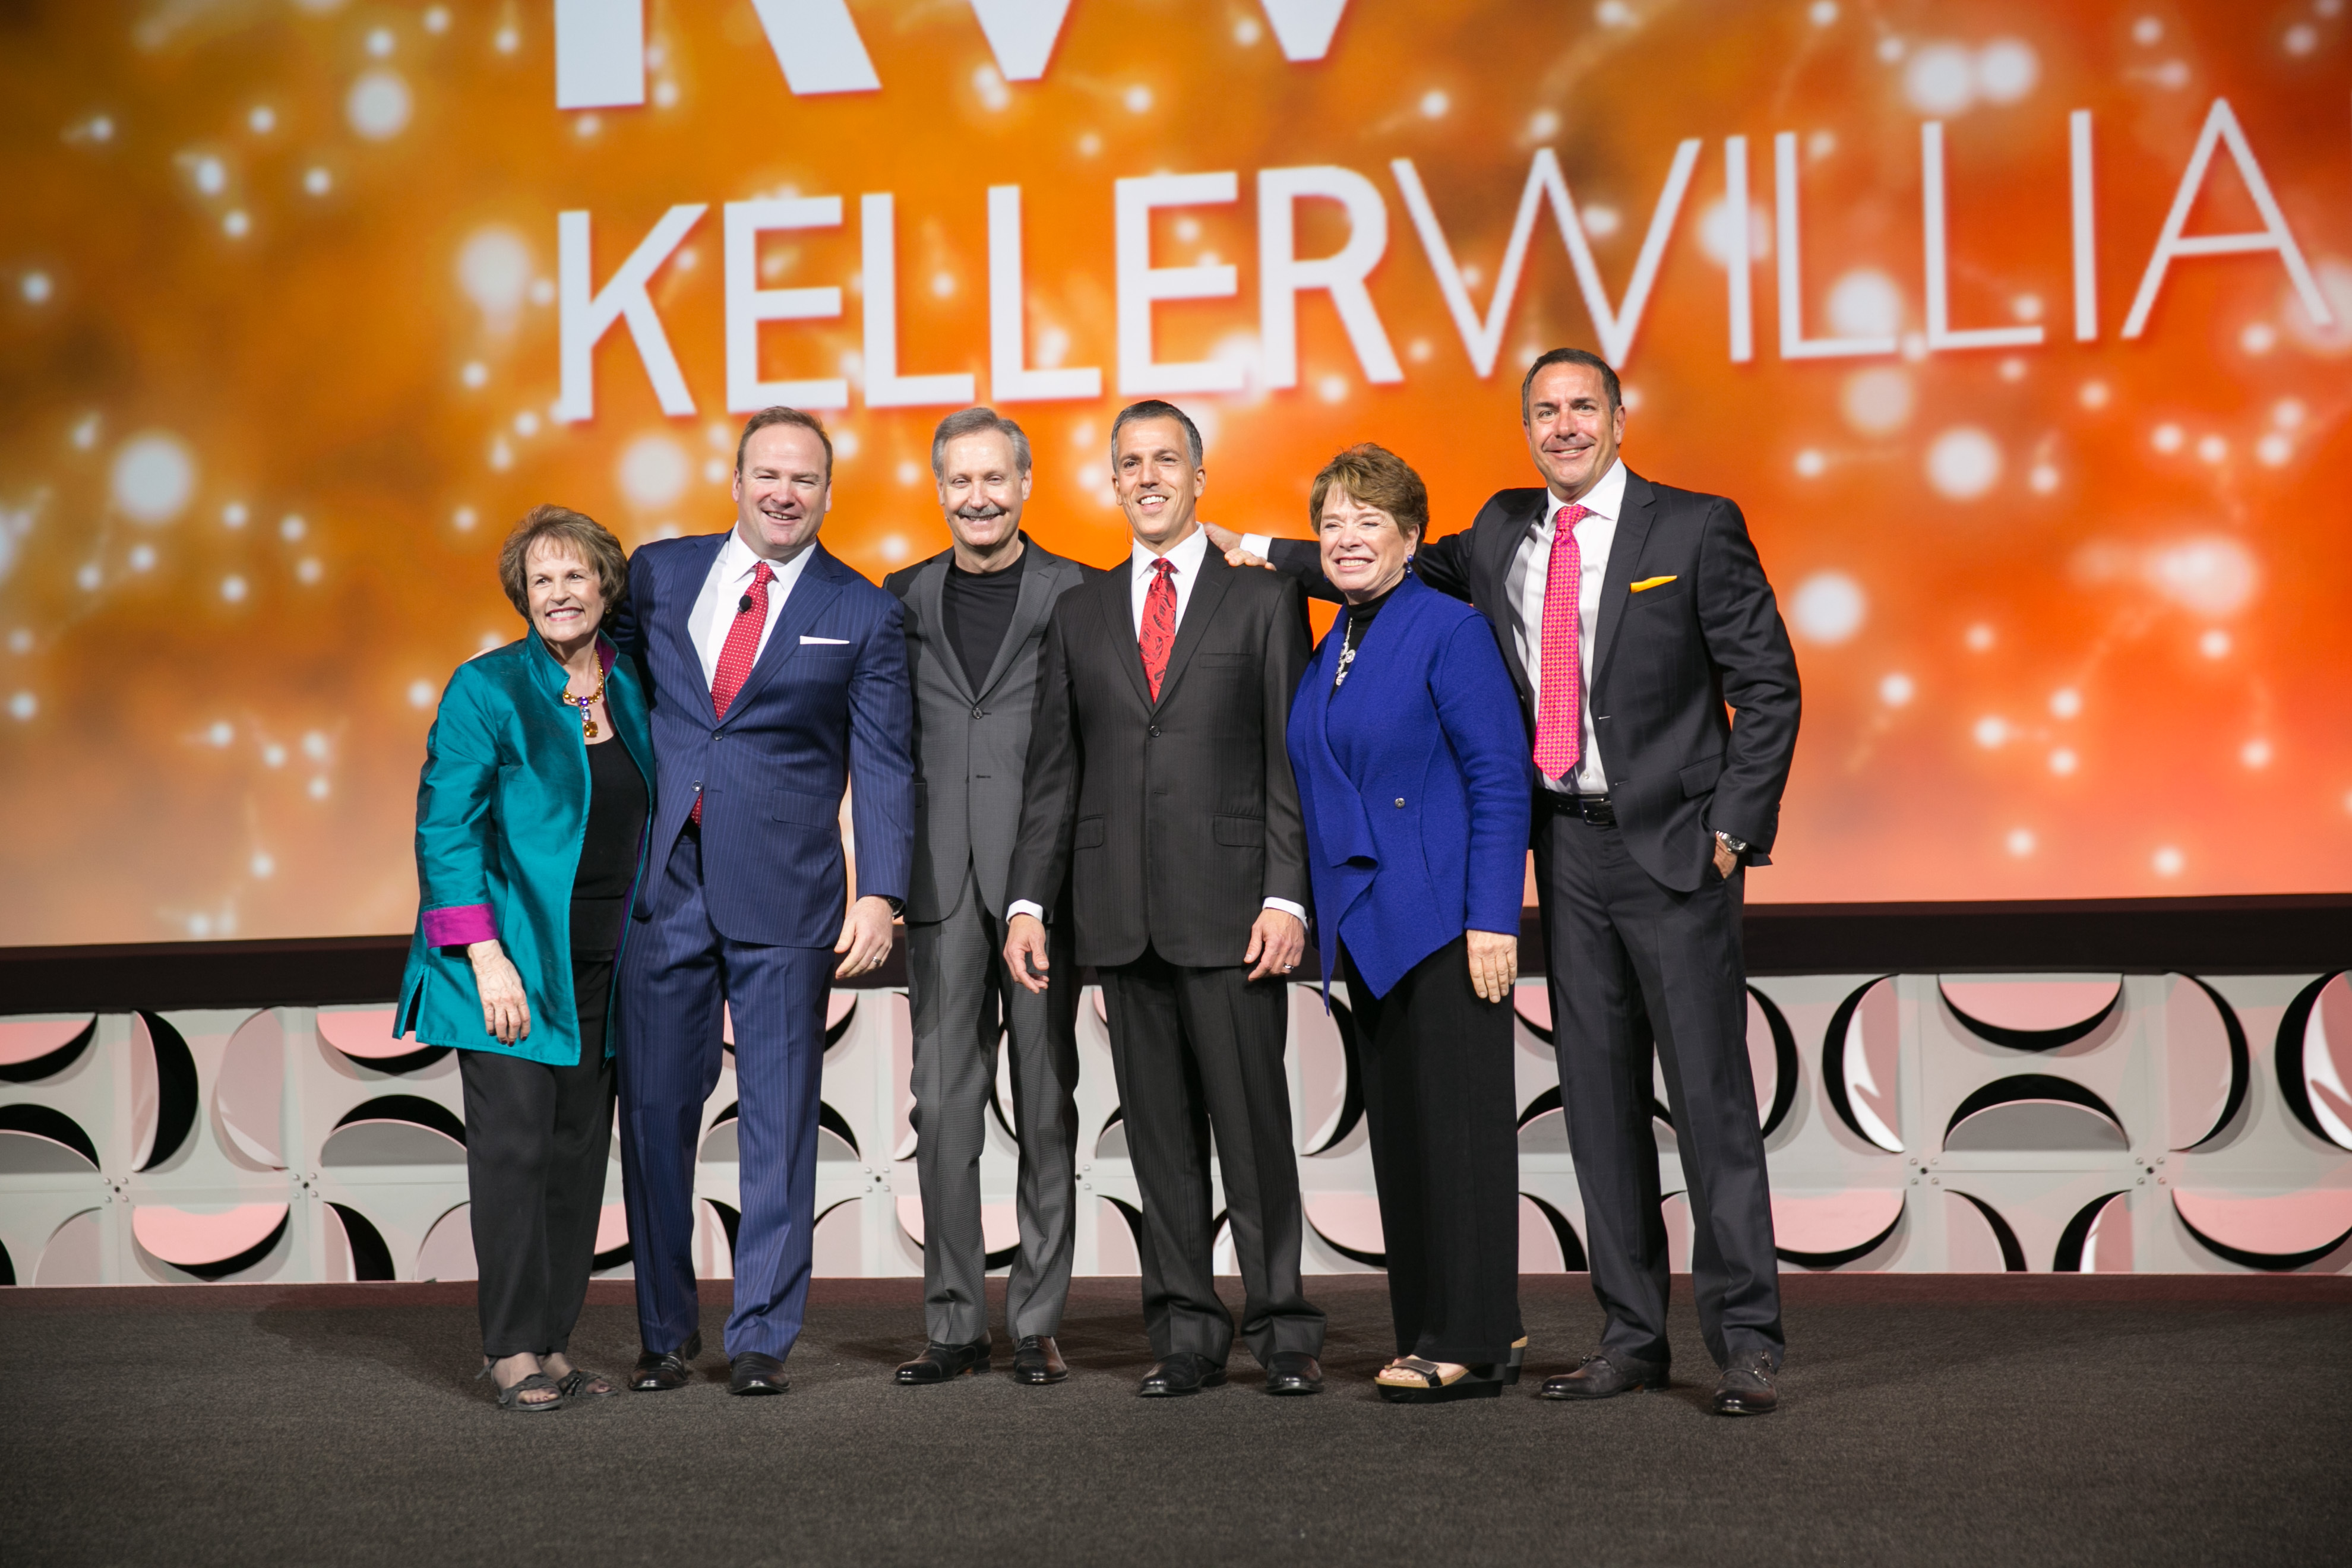 Keller Williams Now World's Largest Real Estate Franchise by Agent Count | Business Wire